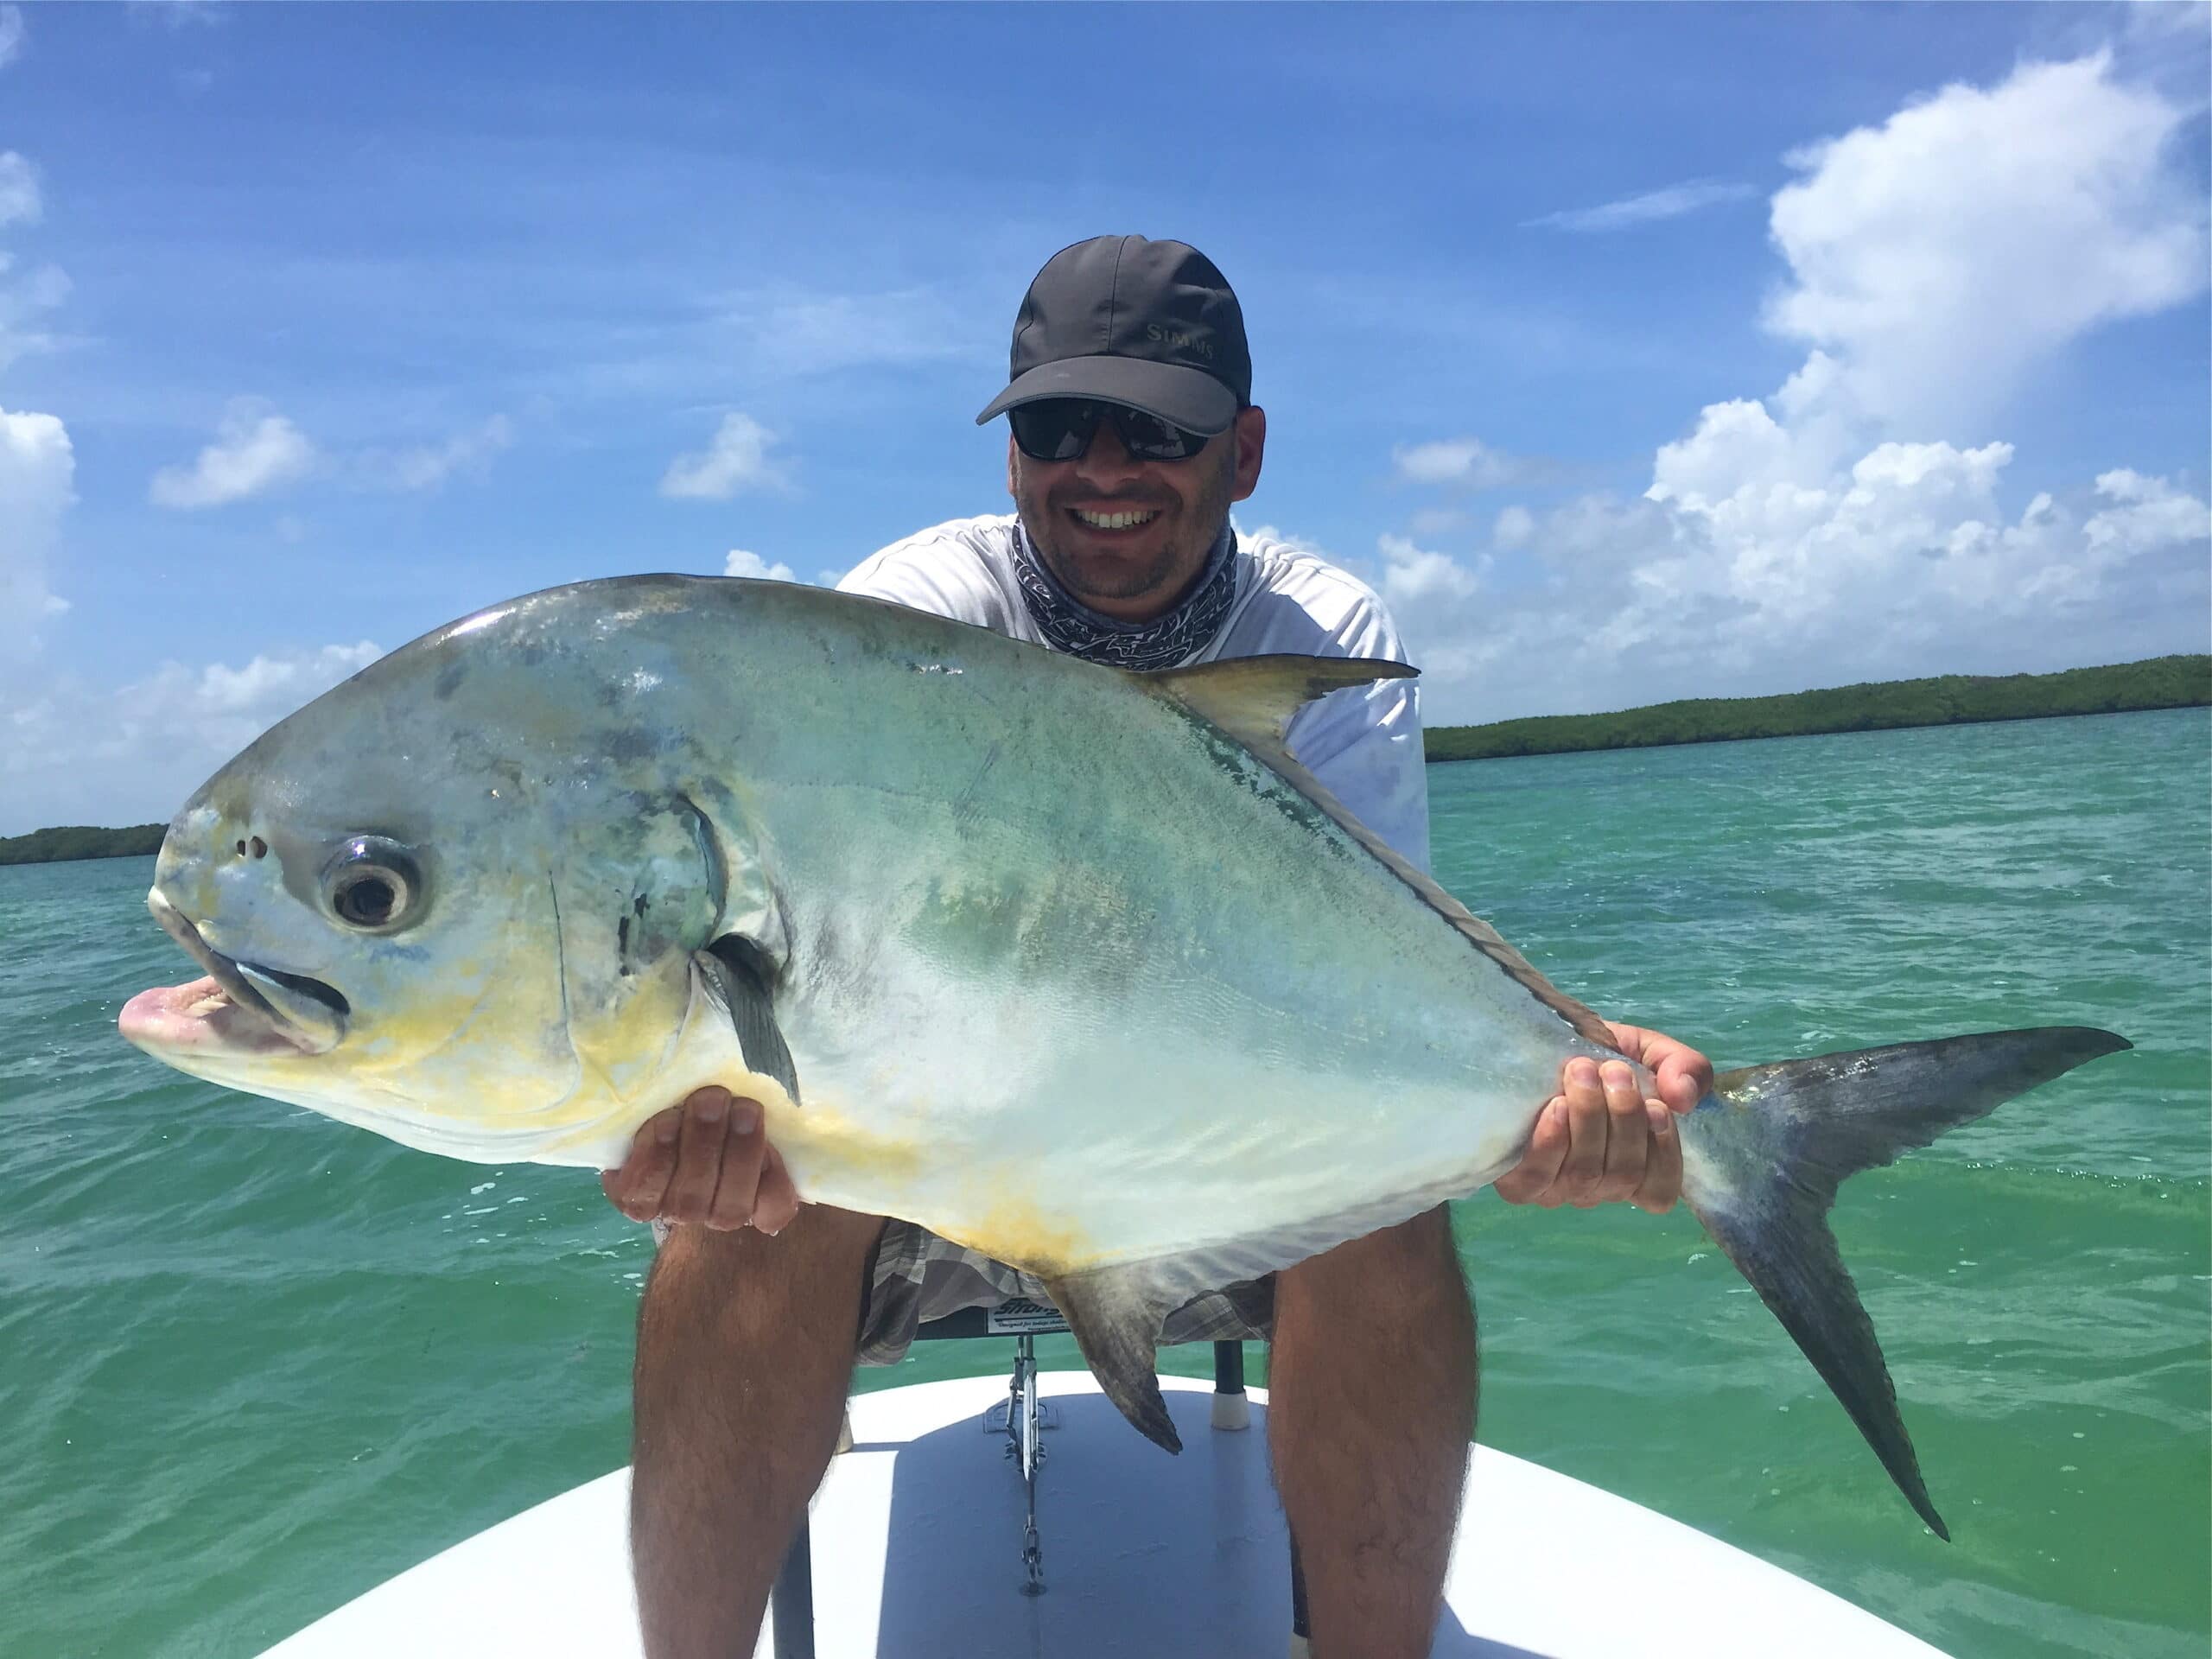 Fishing for Permit in Biscayne Bay, Florida: A Light Tackle Angler’s Guide